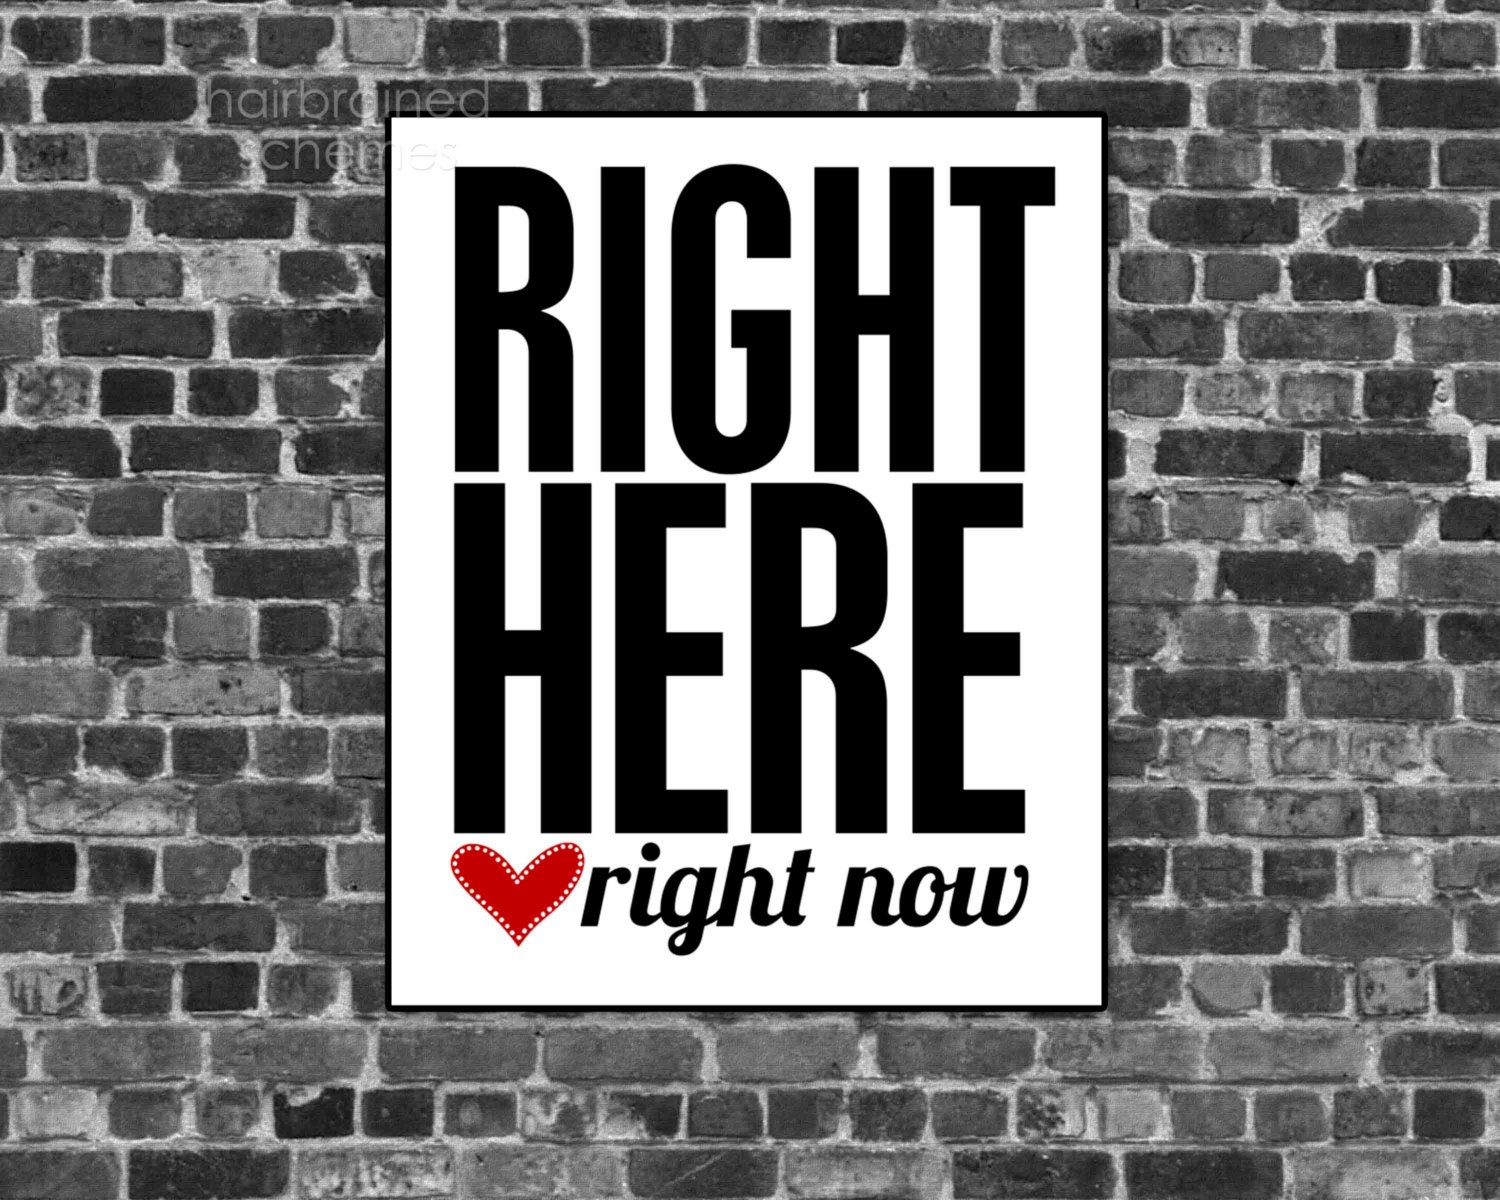 Inspirational Modern Black and White Poster - Right Here Right Now - Motivational Digital Art Print Red Heart Bold - hairbrainedschemes